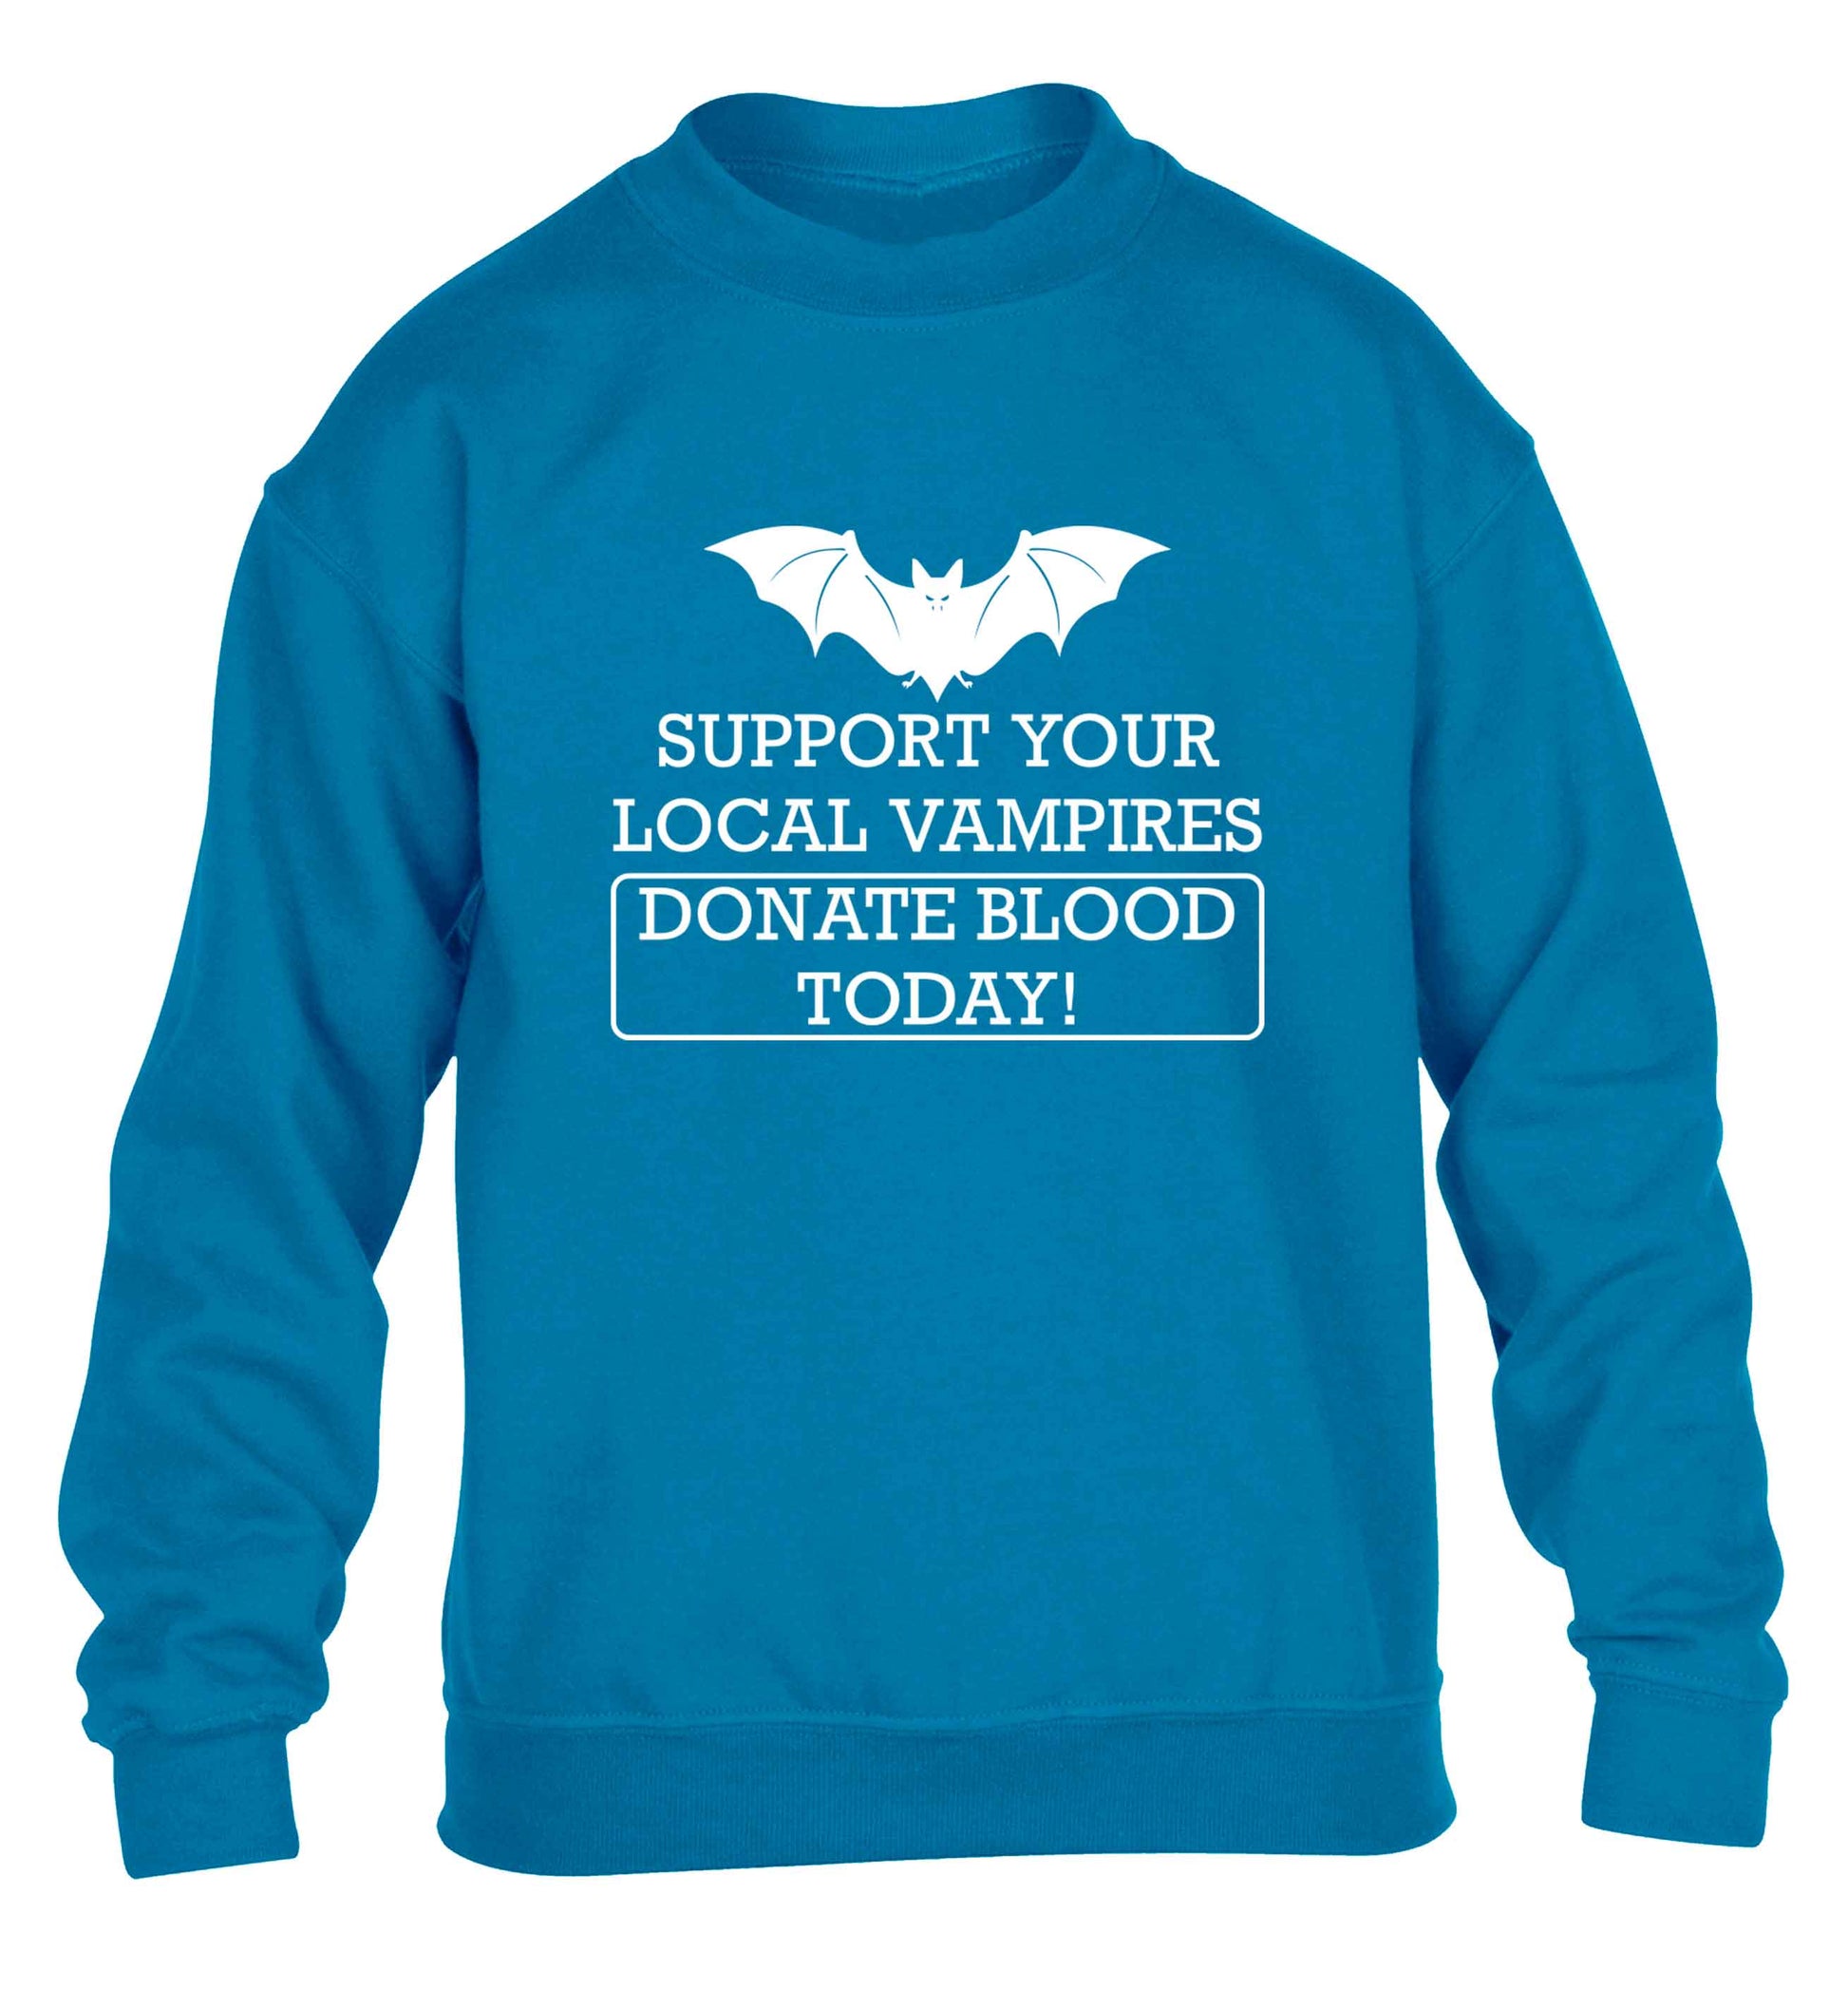 Support your local vampires donate blood today! children's blue sweater 12-13 Years